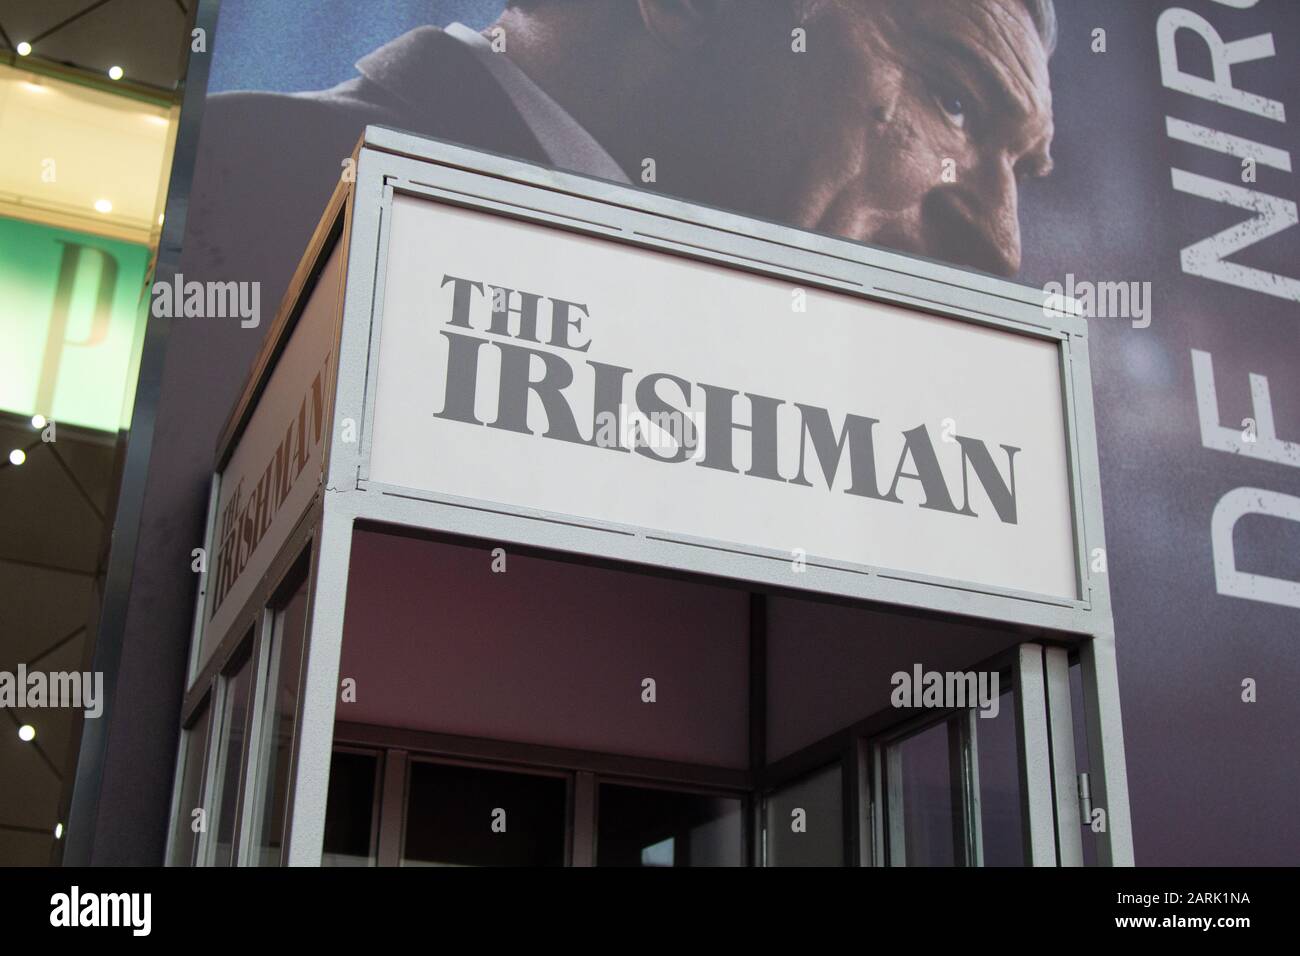 Phone cabine with the logo of The Irishman in Netflix event. Stock Photo